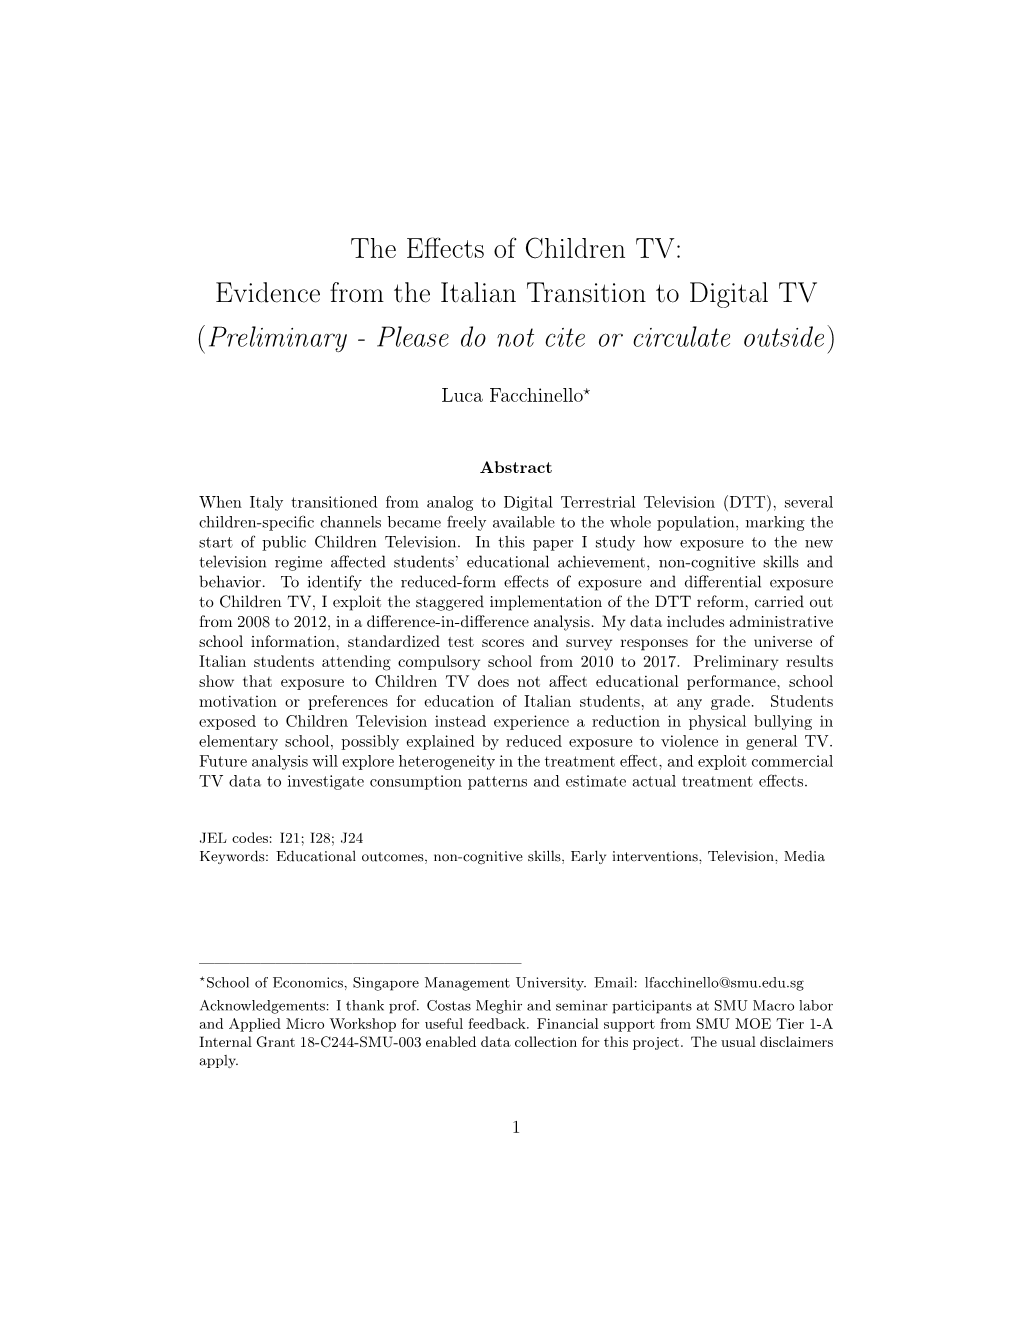 The Effects of Children TV: Evidence from the Italian Transition to Digital TV